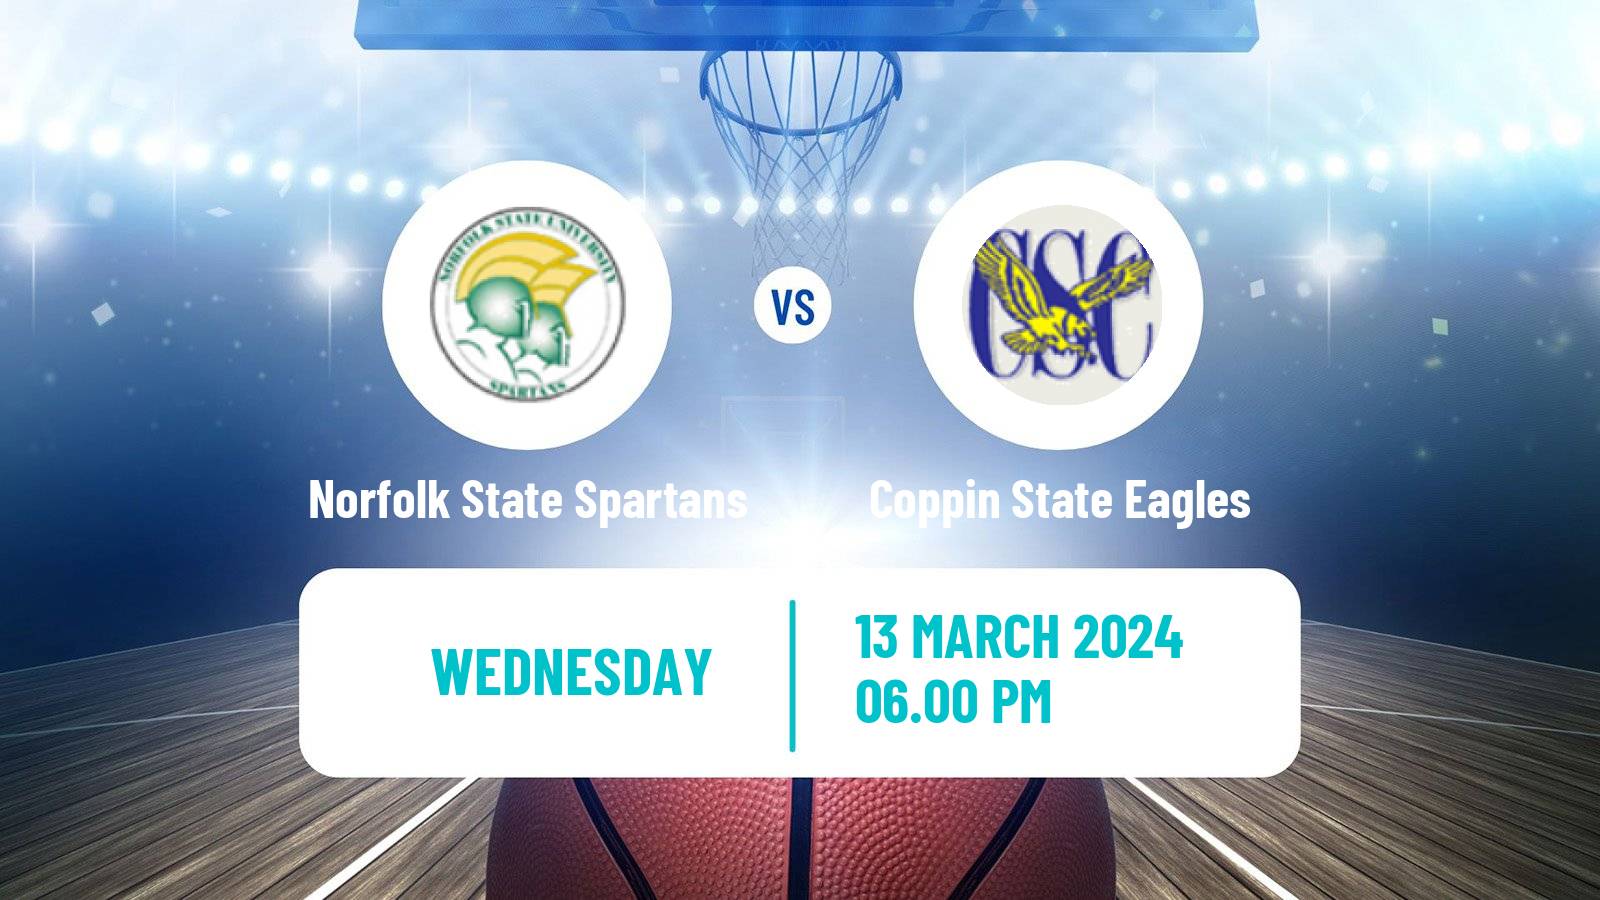 Basketball NCAA College Basketball Norfolk State Spartans - Coppin State Eagles